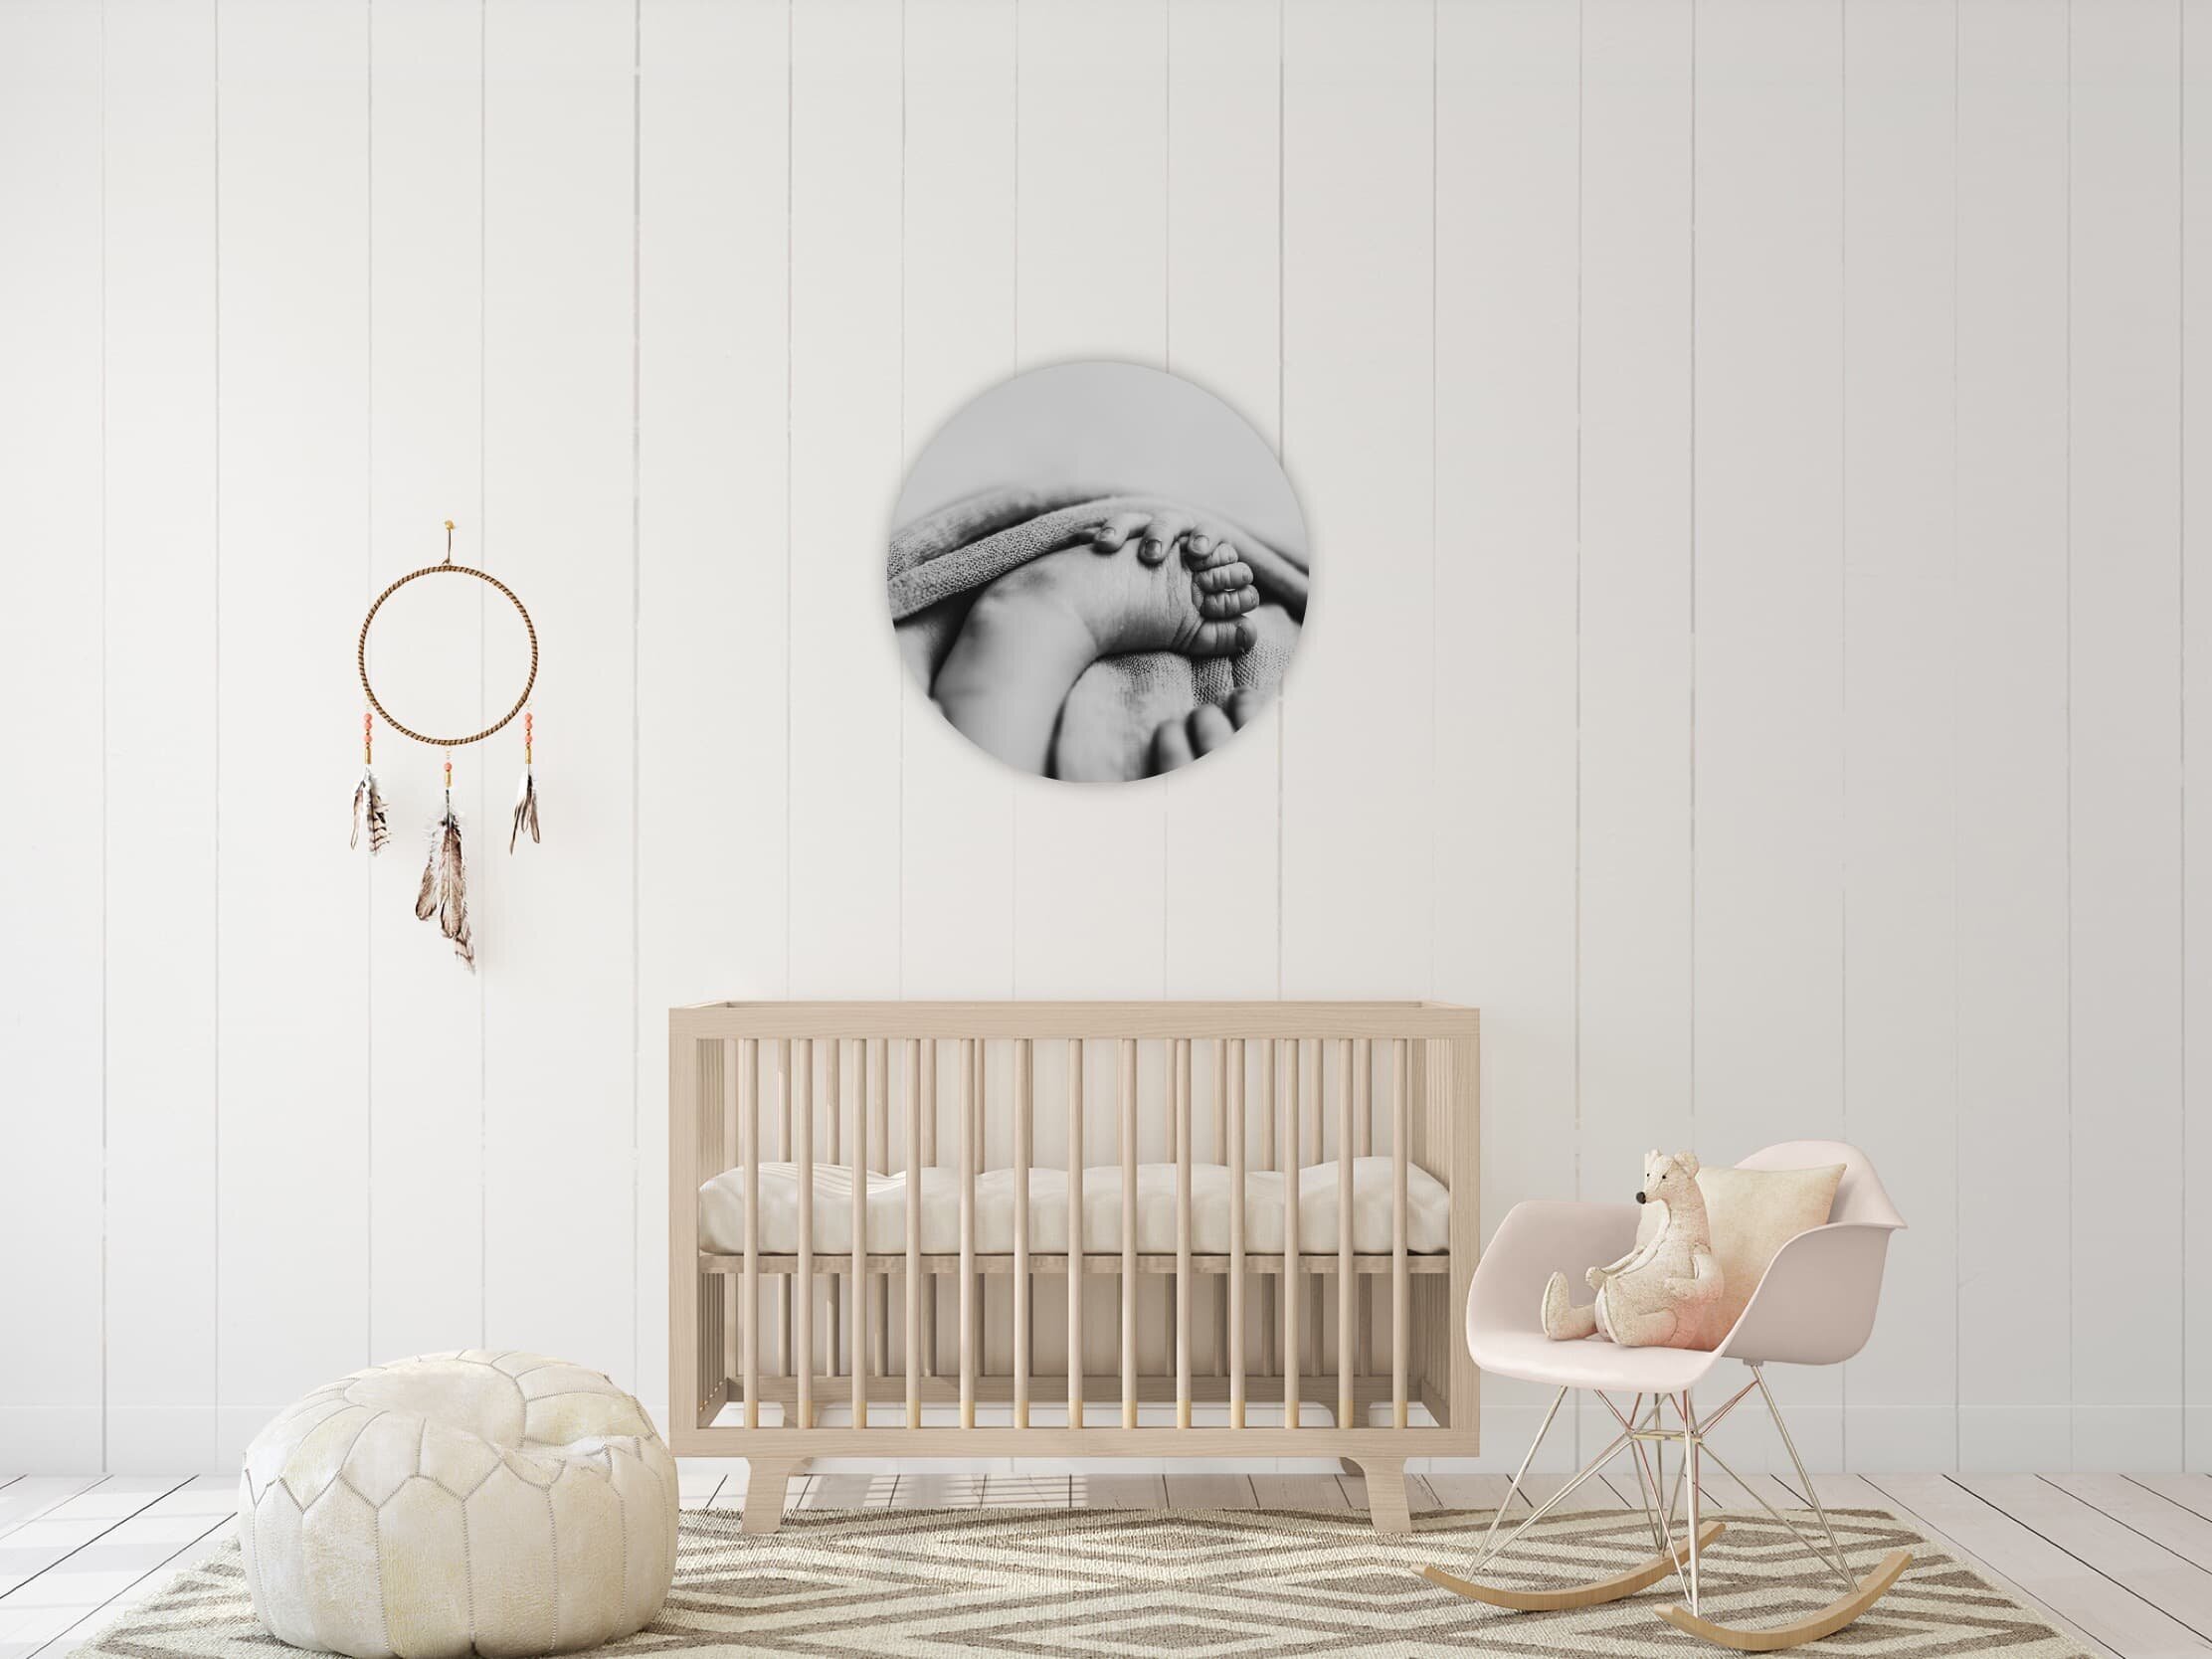 Newborn Photography Fremantle details display in nursery |gracie and the wren